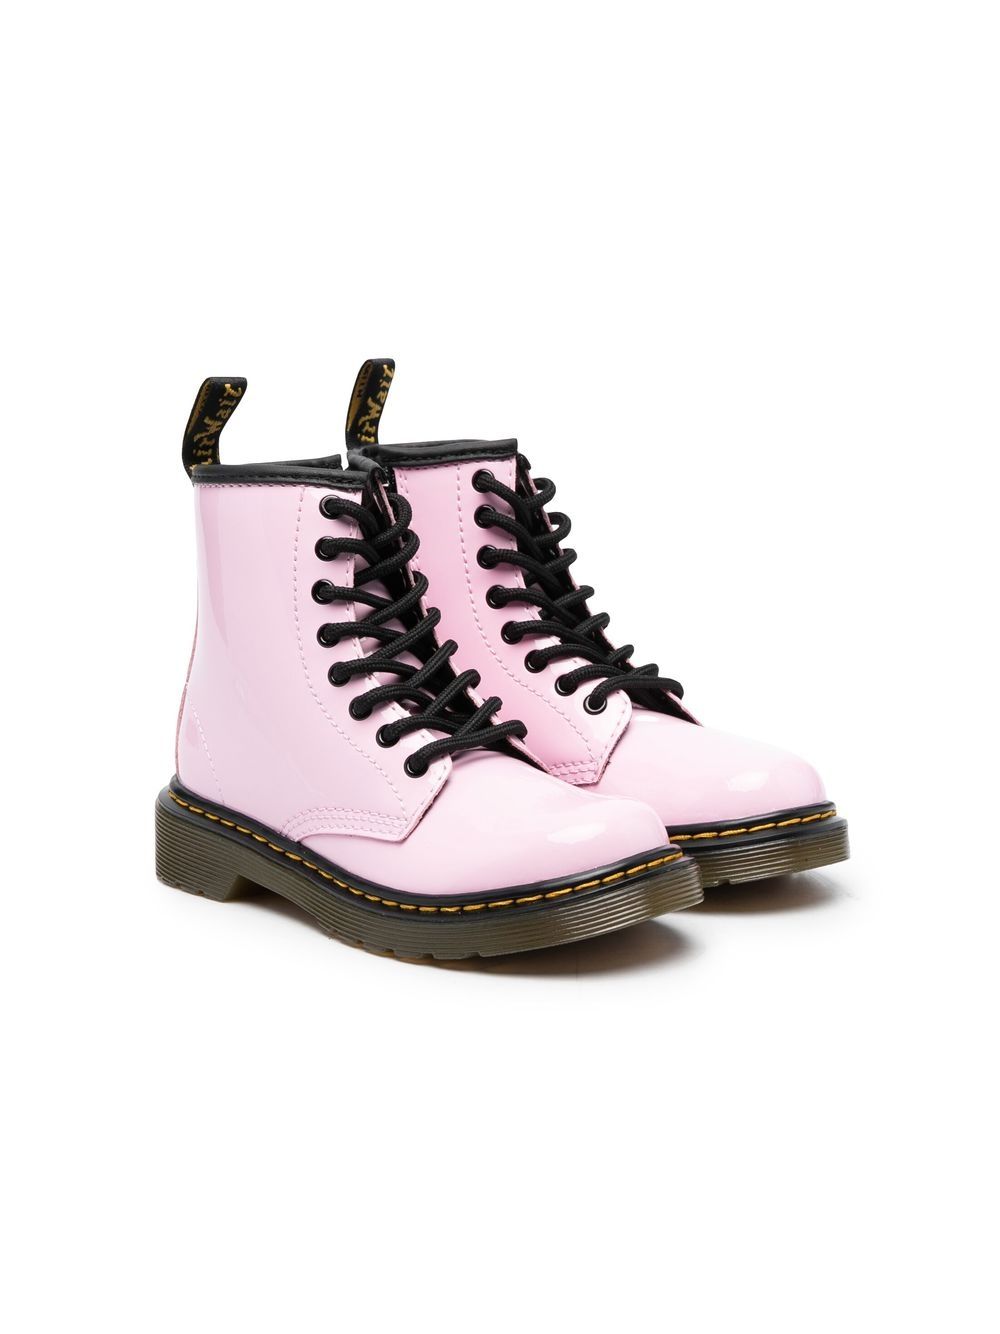 Dr. Martens Kids 1460 patent leather boots - Pink